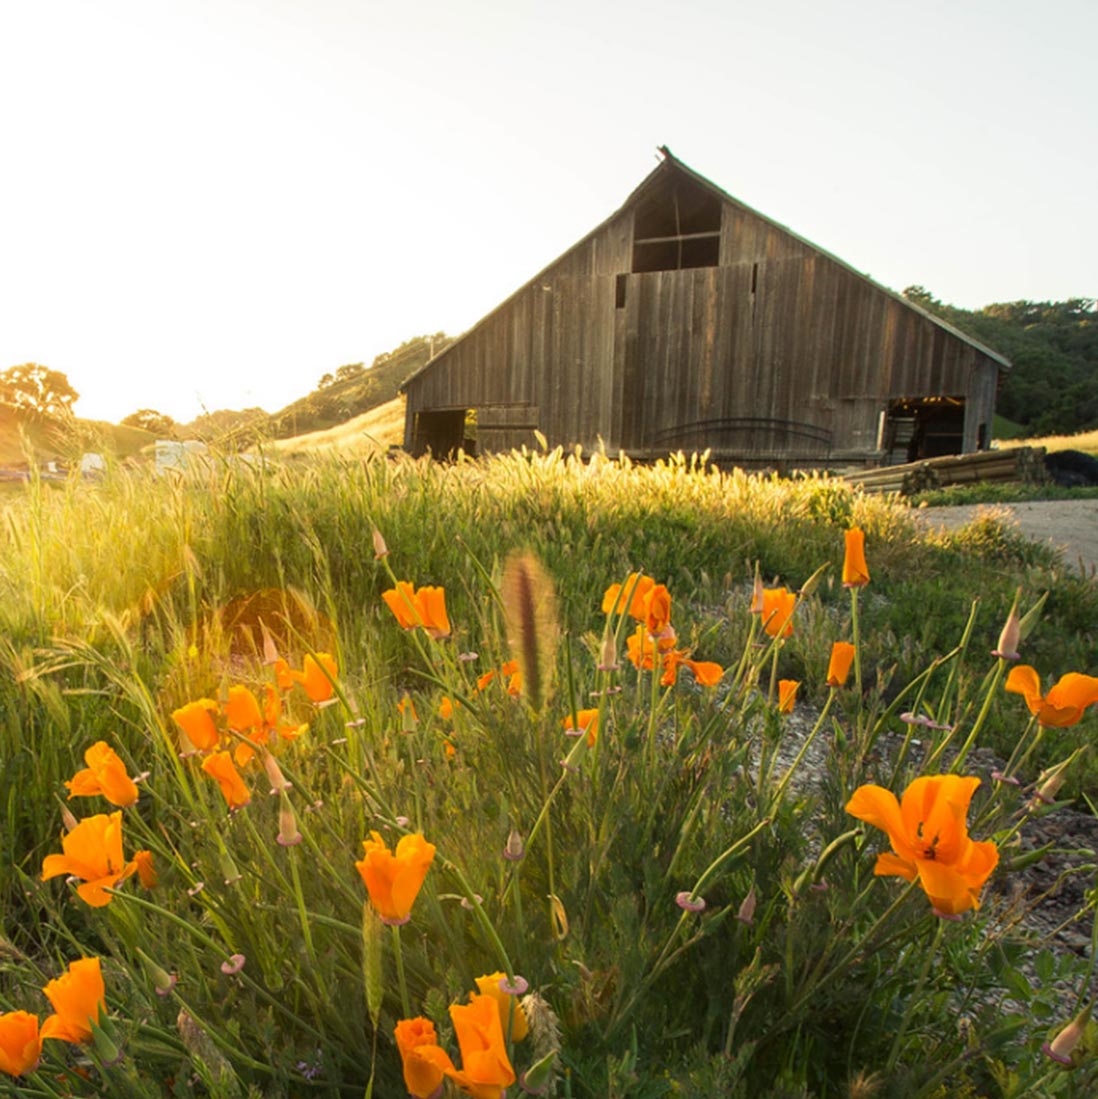 A field of poppies and an old barn during sunset